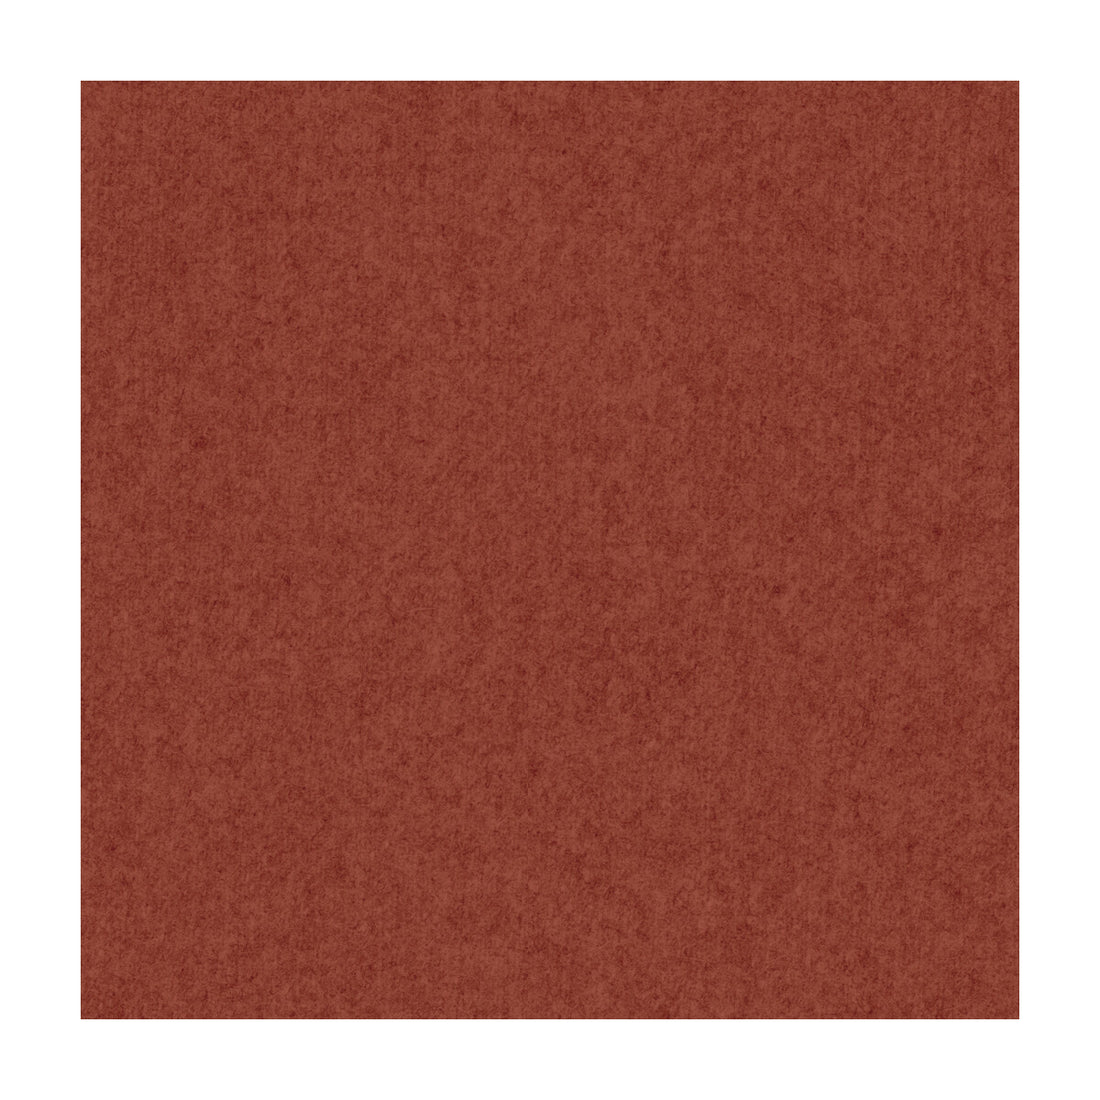 Jefferson Wool fabric in maple color - pattern 34397.24.0 - by Kravet Contract